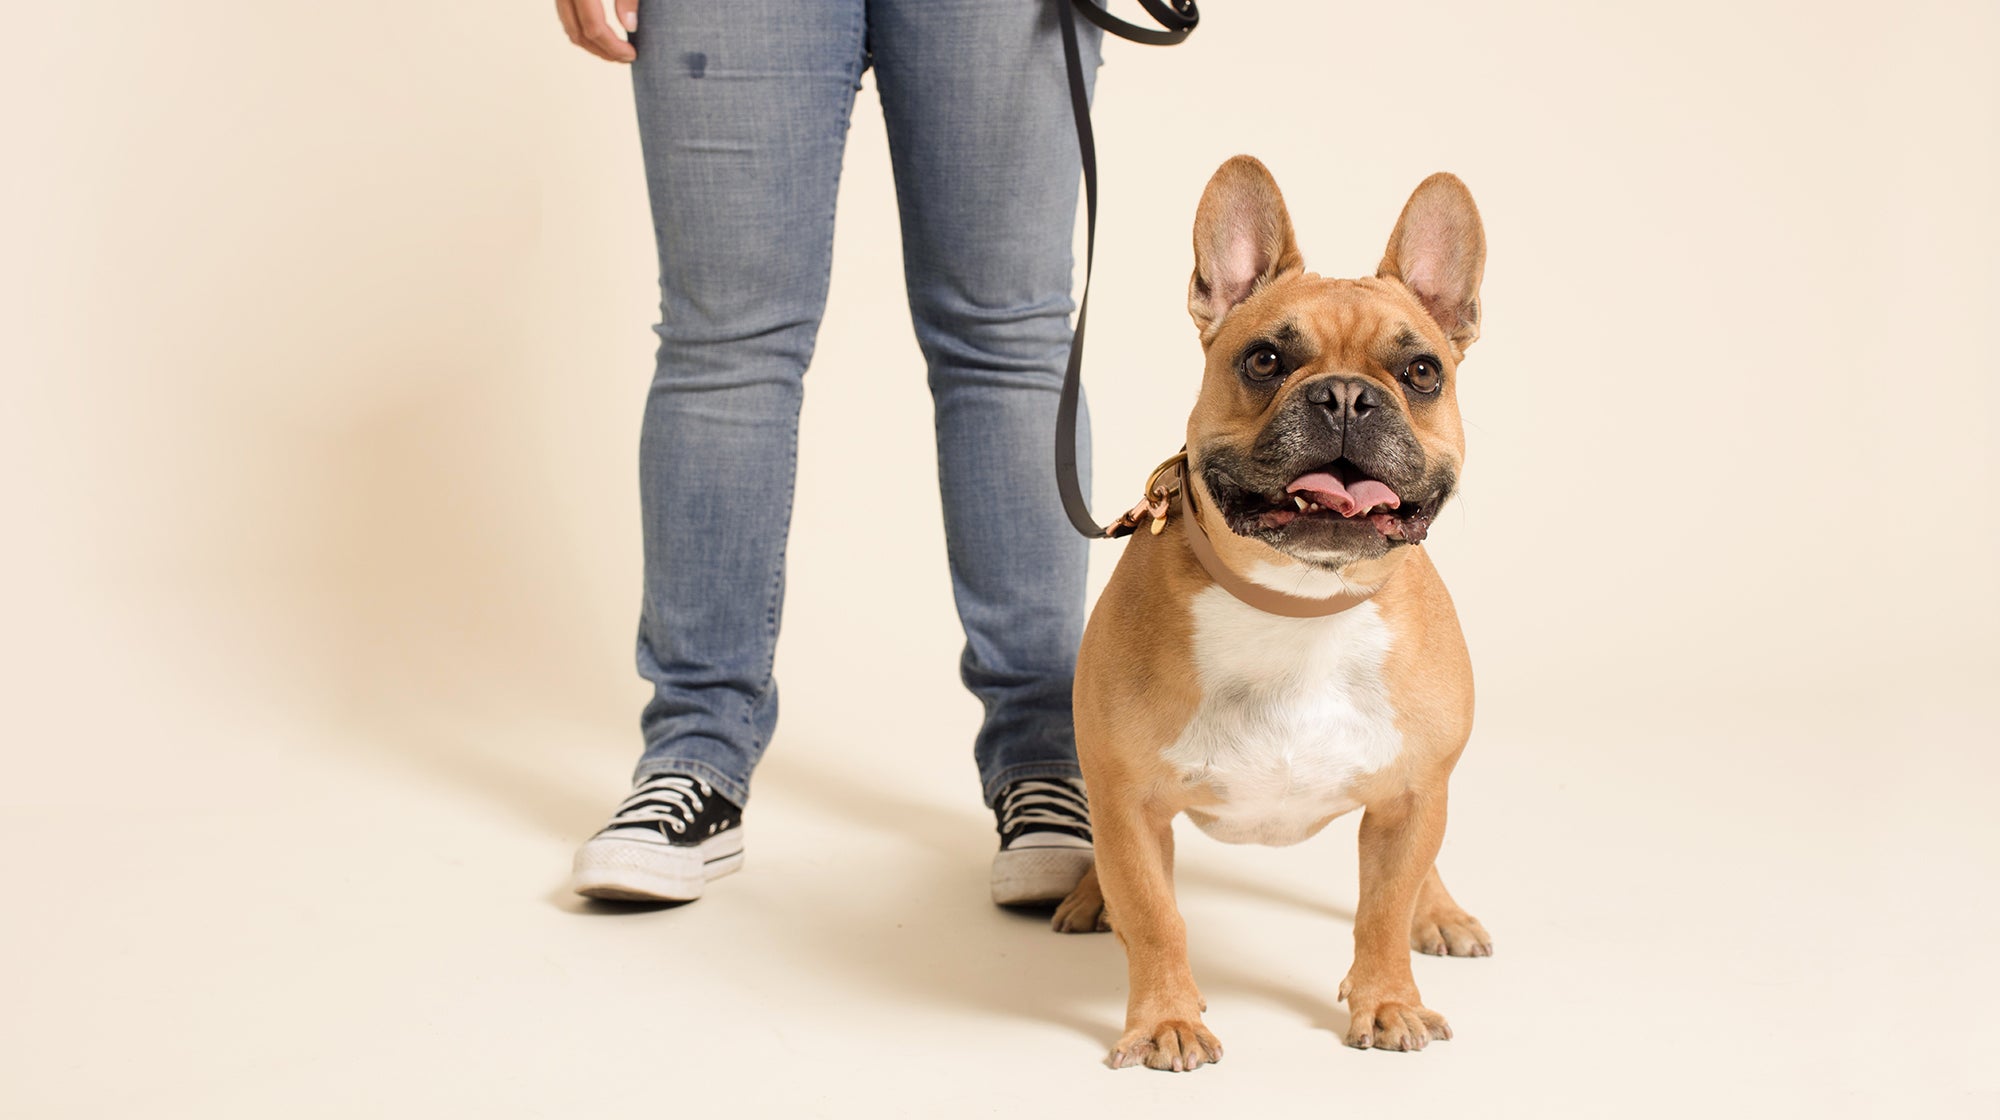 A tan-coloured French Bulldog, on a leash with their owner, against a beige coloured background